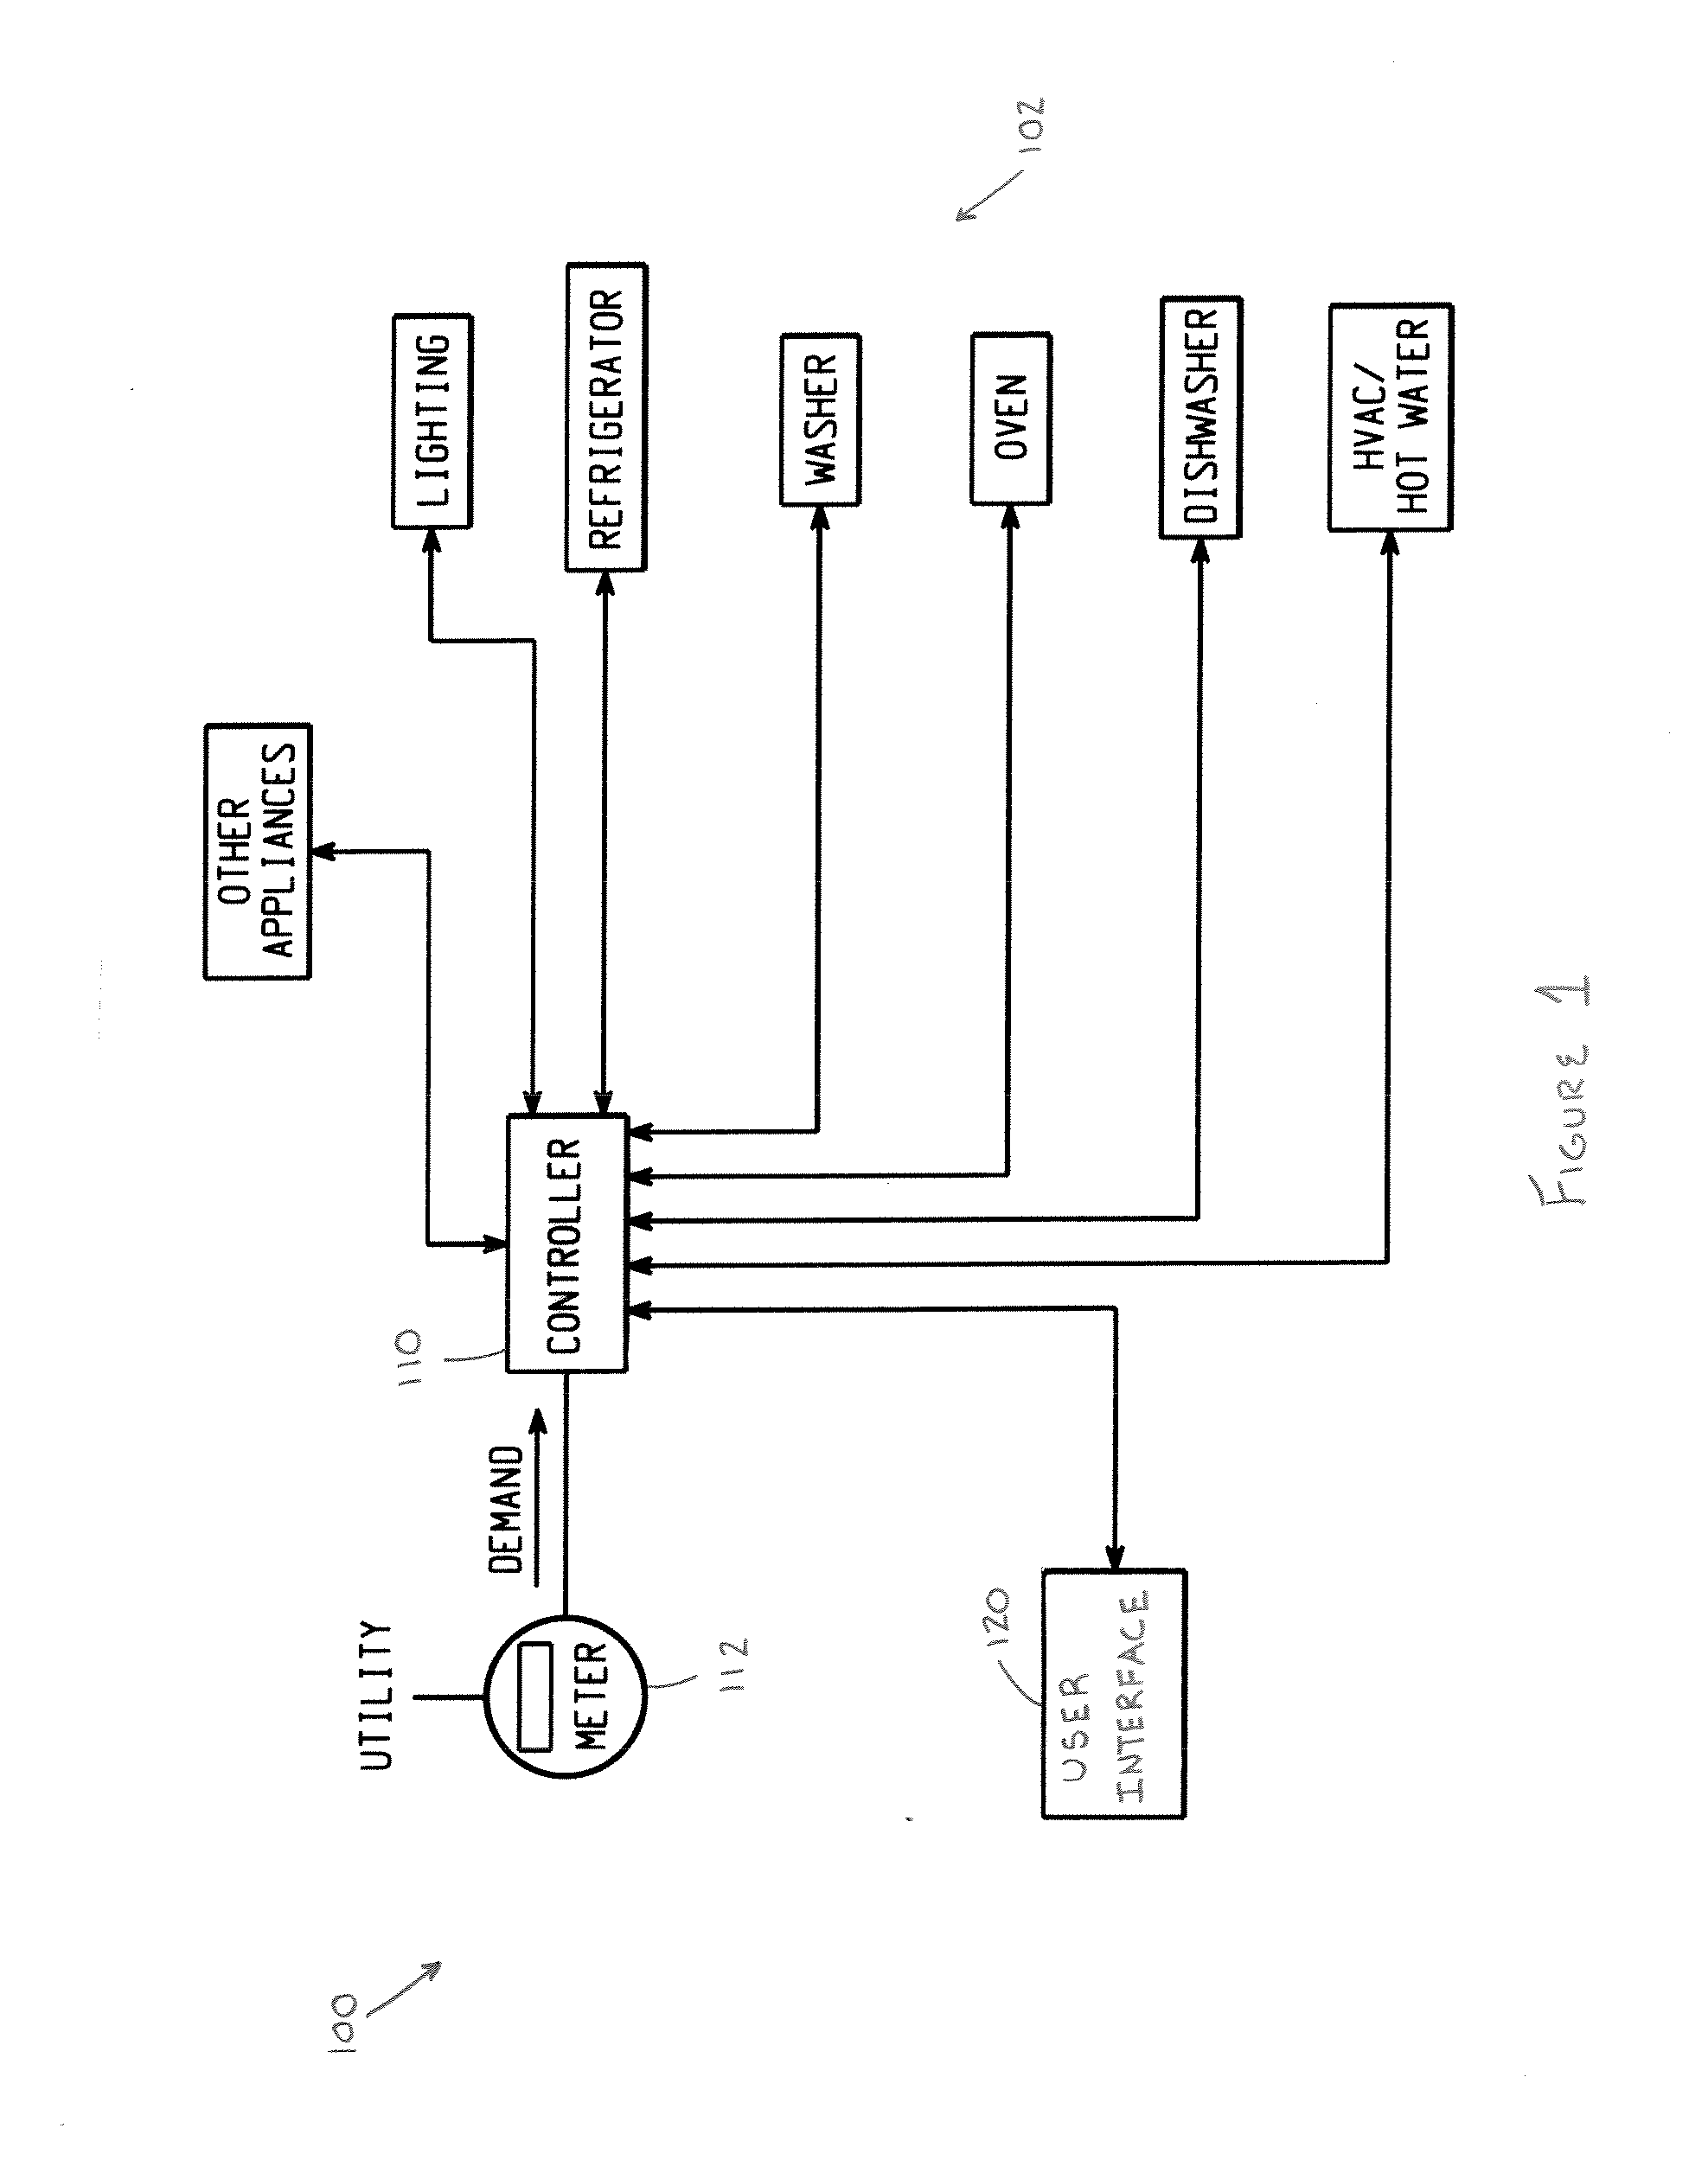 Household energy management system and method for one or more appliances